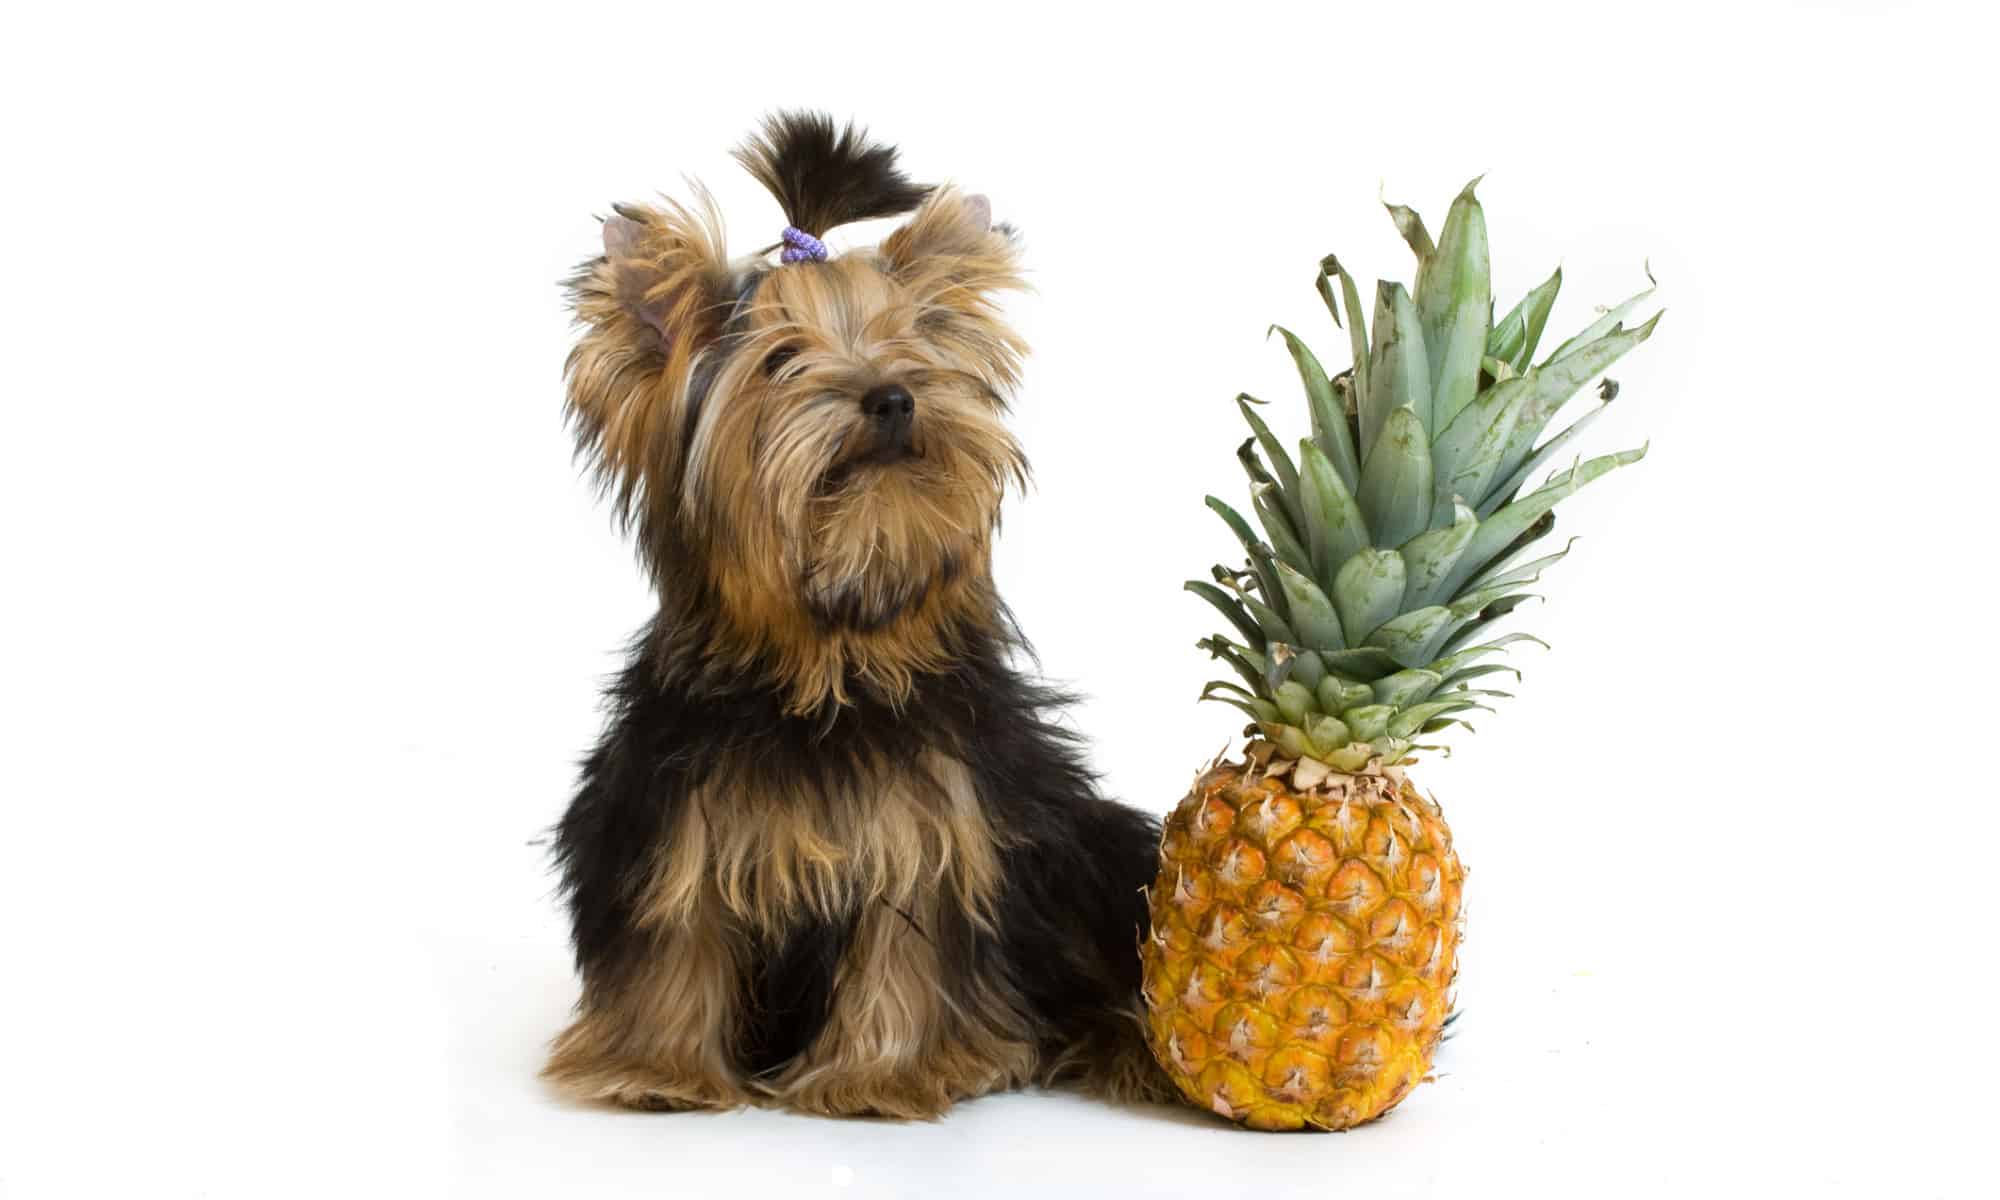 A tiny Yorkie sits next to a pineapple on a white background